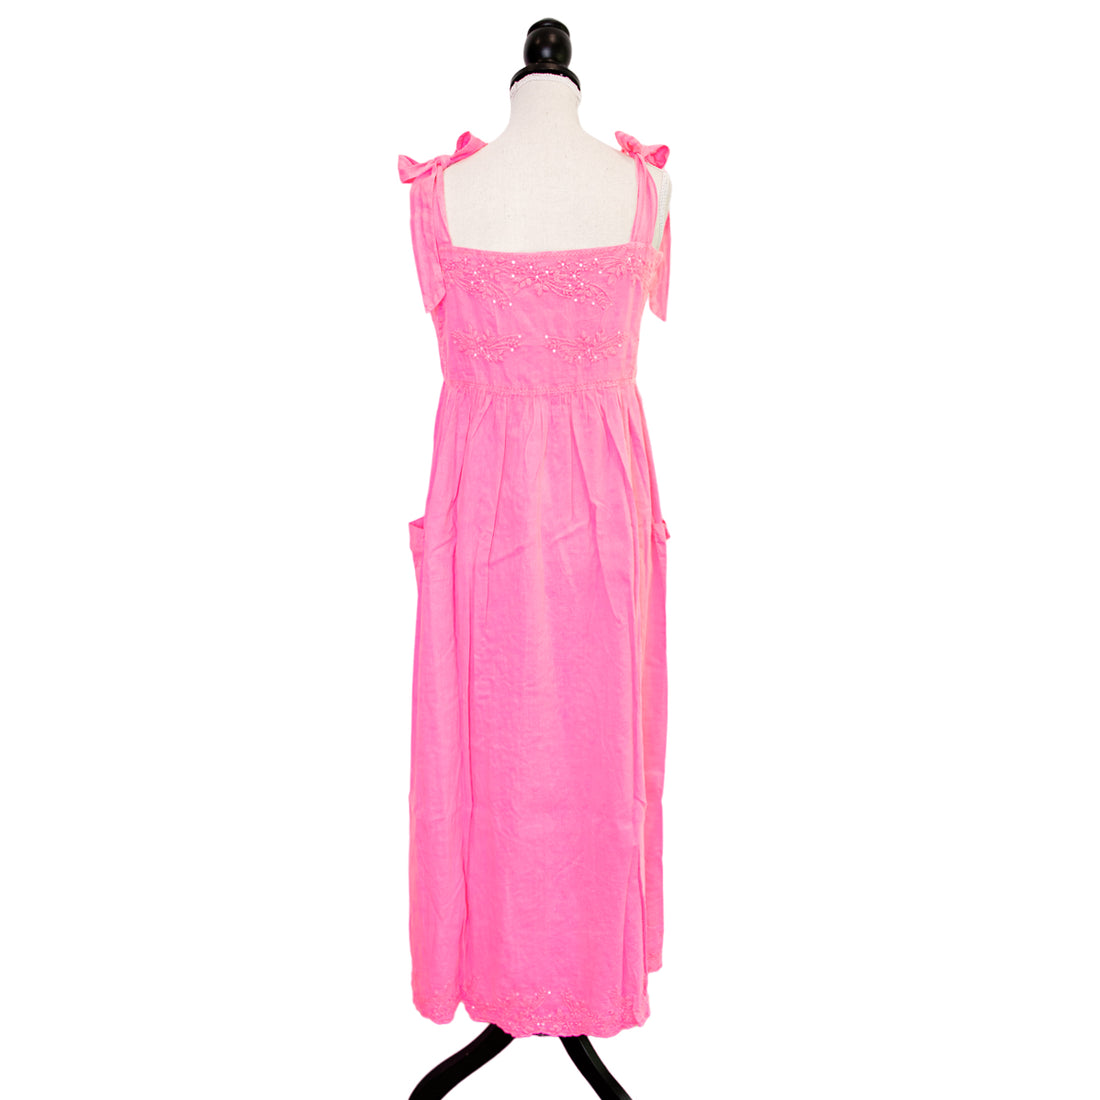 Juliet Dunn midi length summer dress with button placket and patch pockets in neon pink